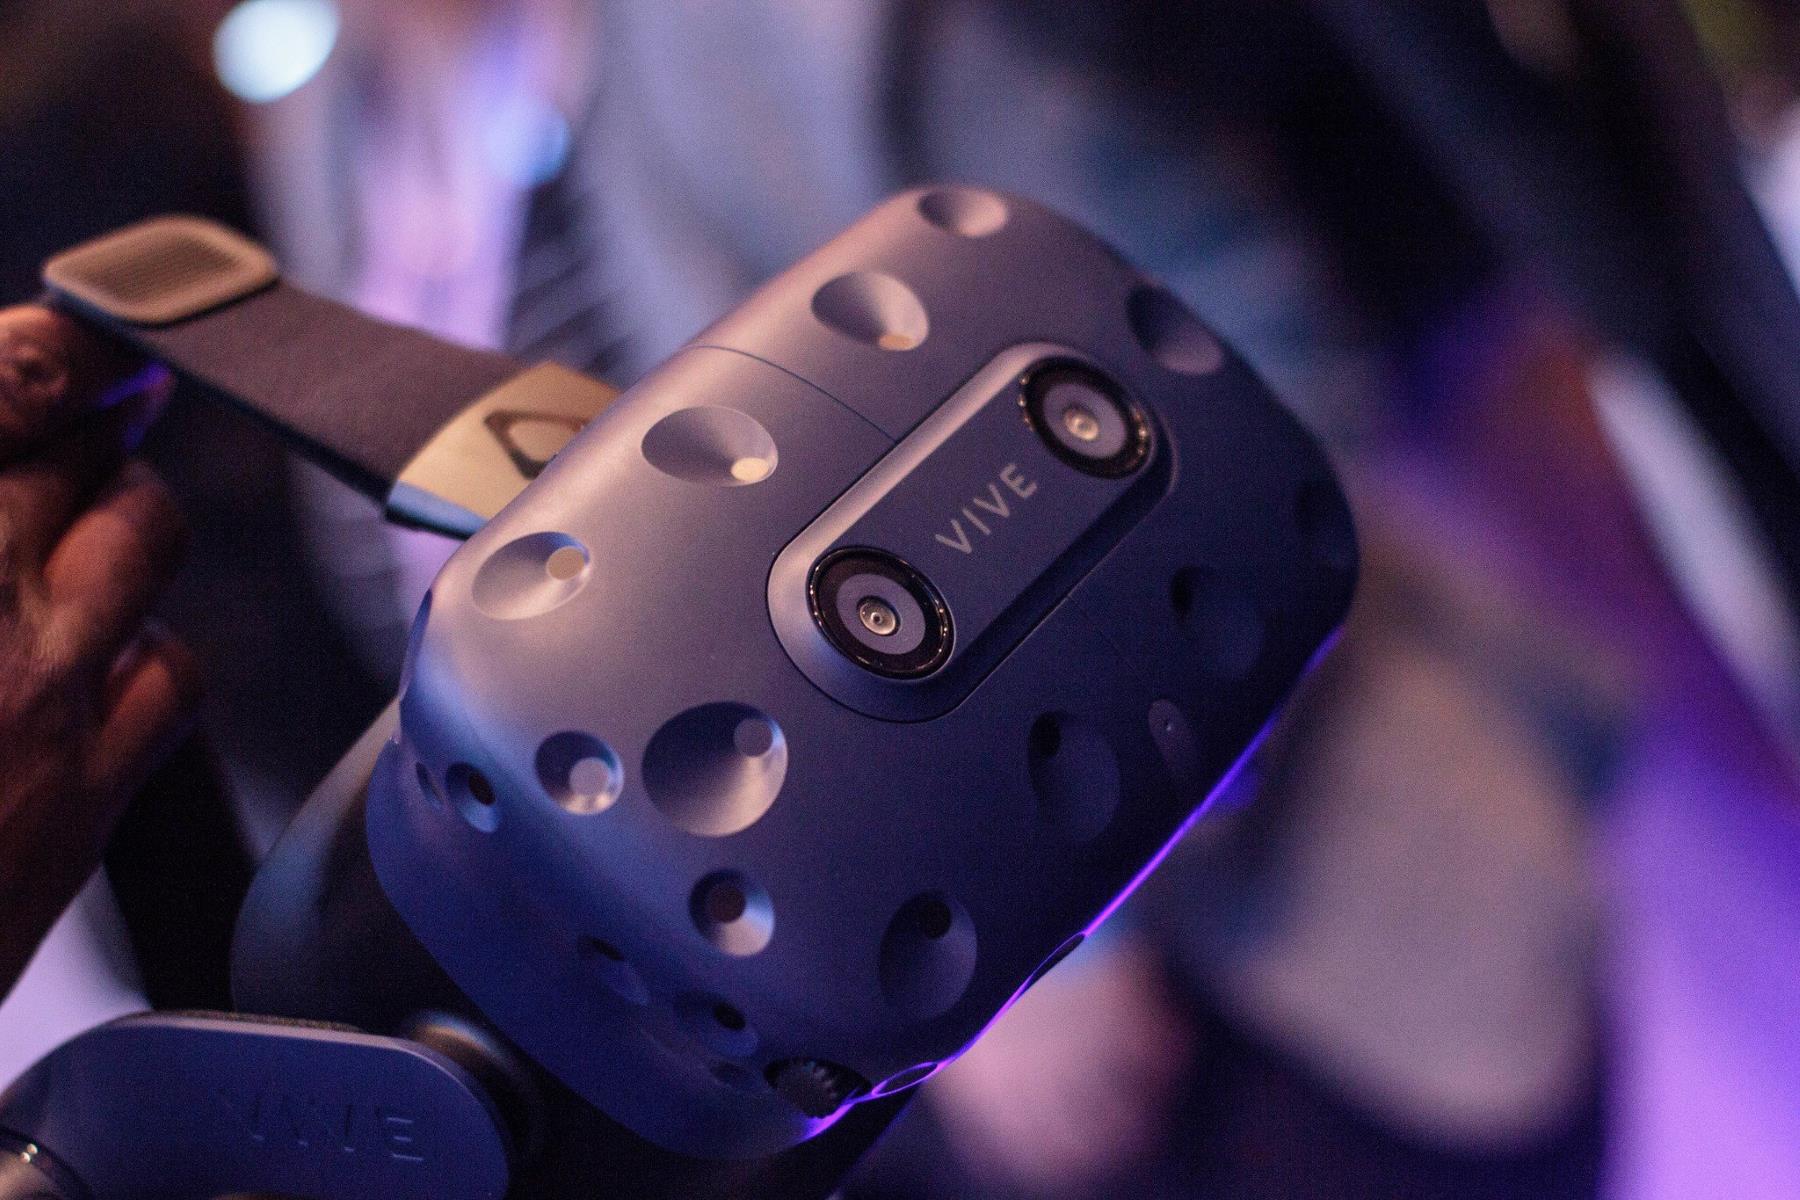 Why Should I Get The HTC Vive